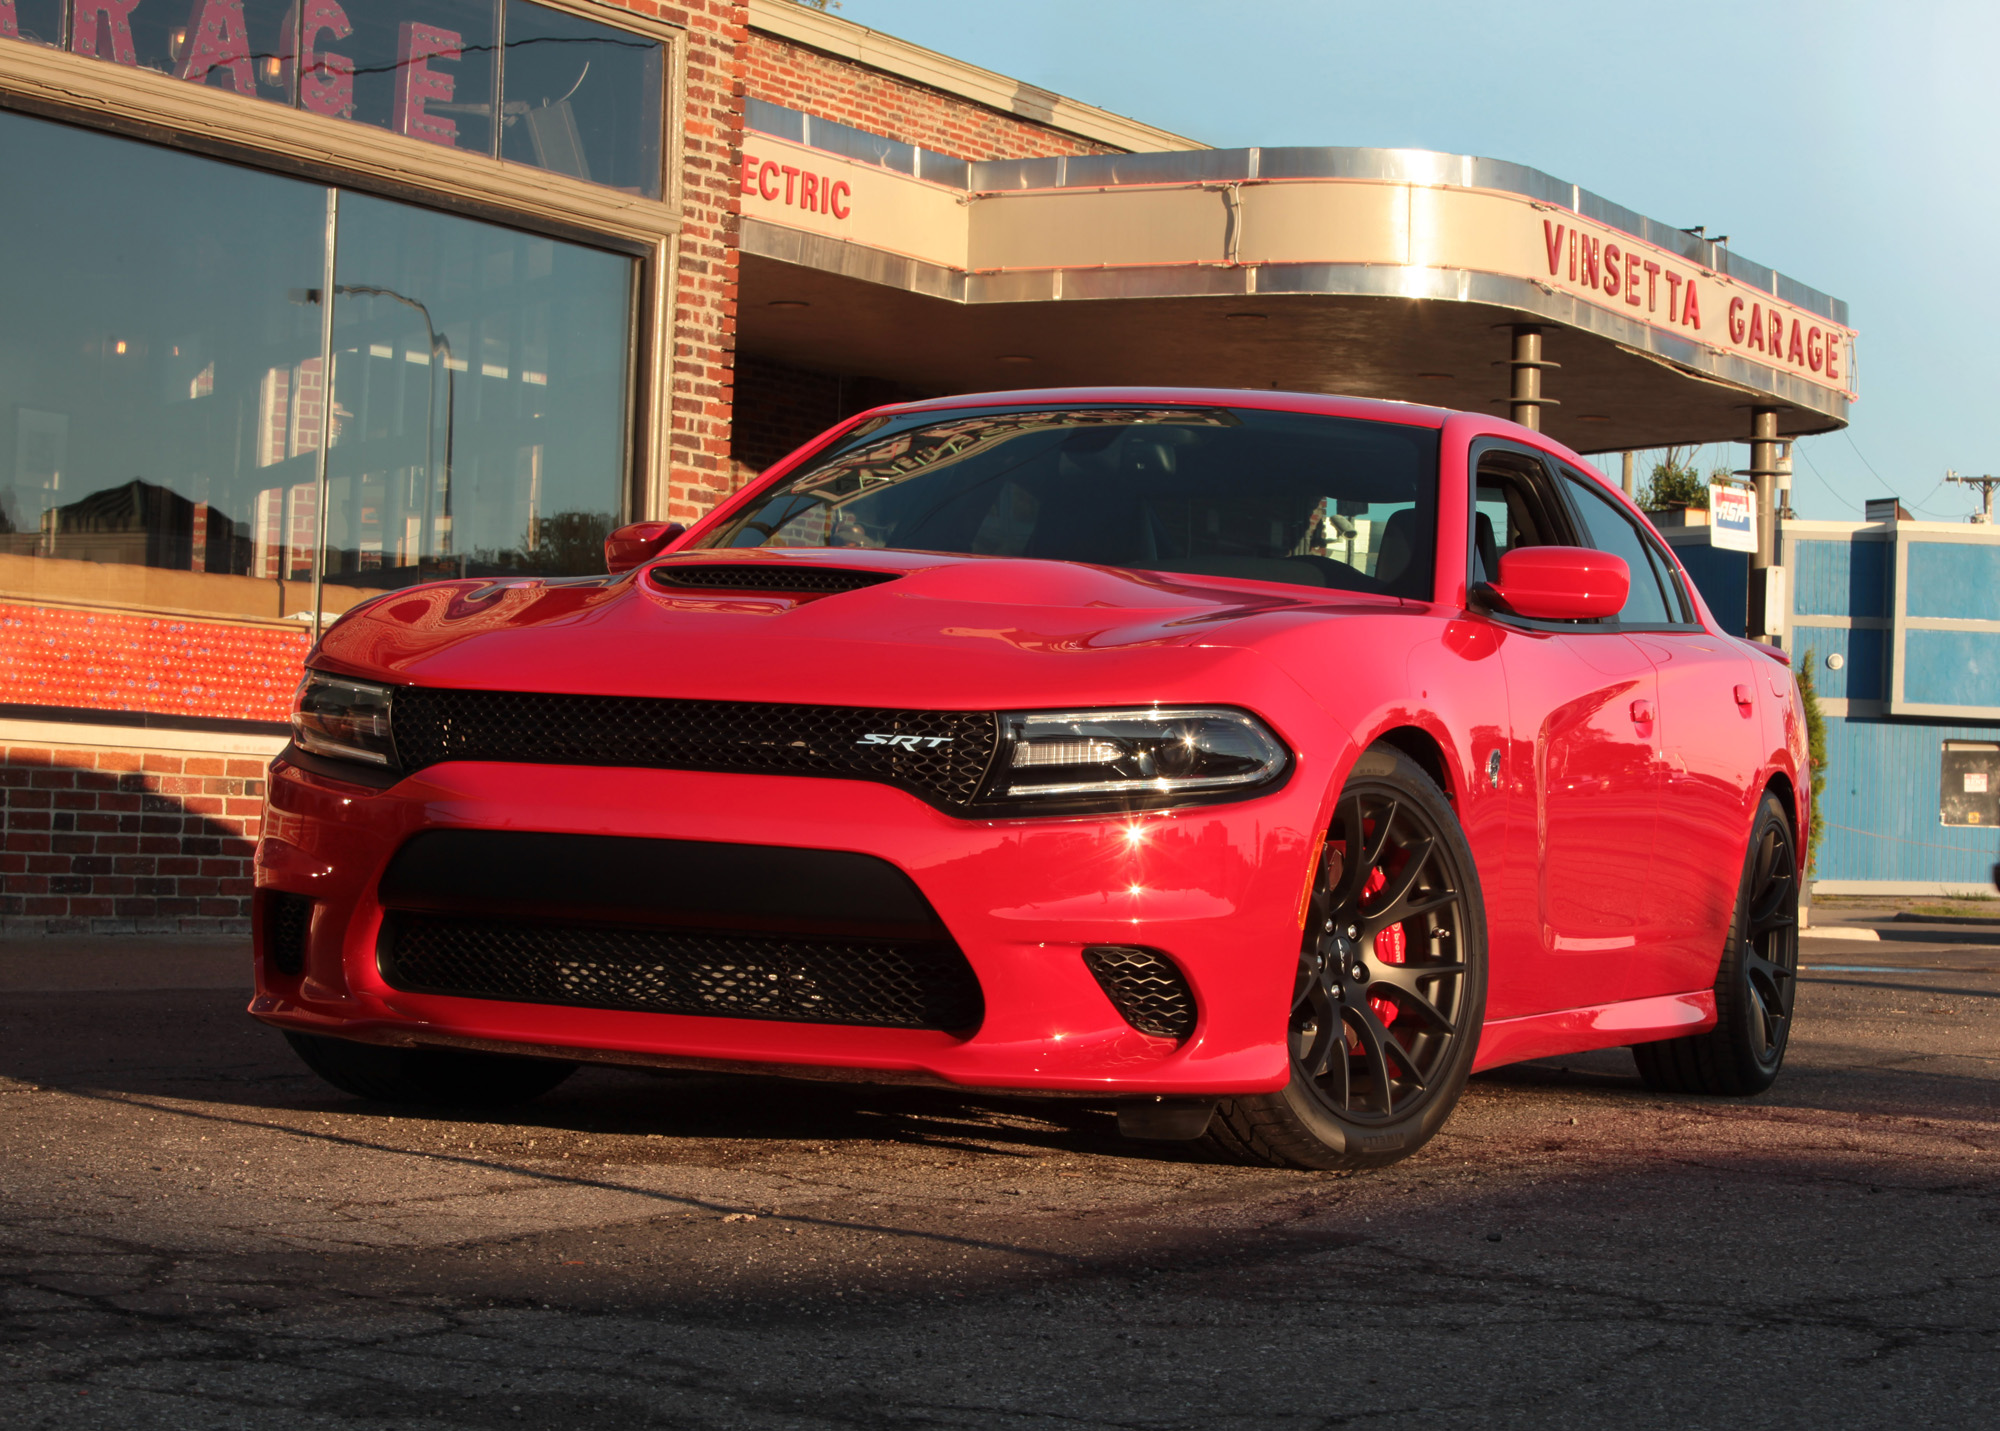 Dodge Kicks off Woodward Dream Cruise Unveiling the New 2015 Dodge Charger SRT Hellcat – the Quickest, Fastest and Most Powerful Sedan in The World